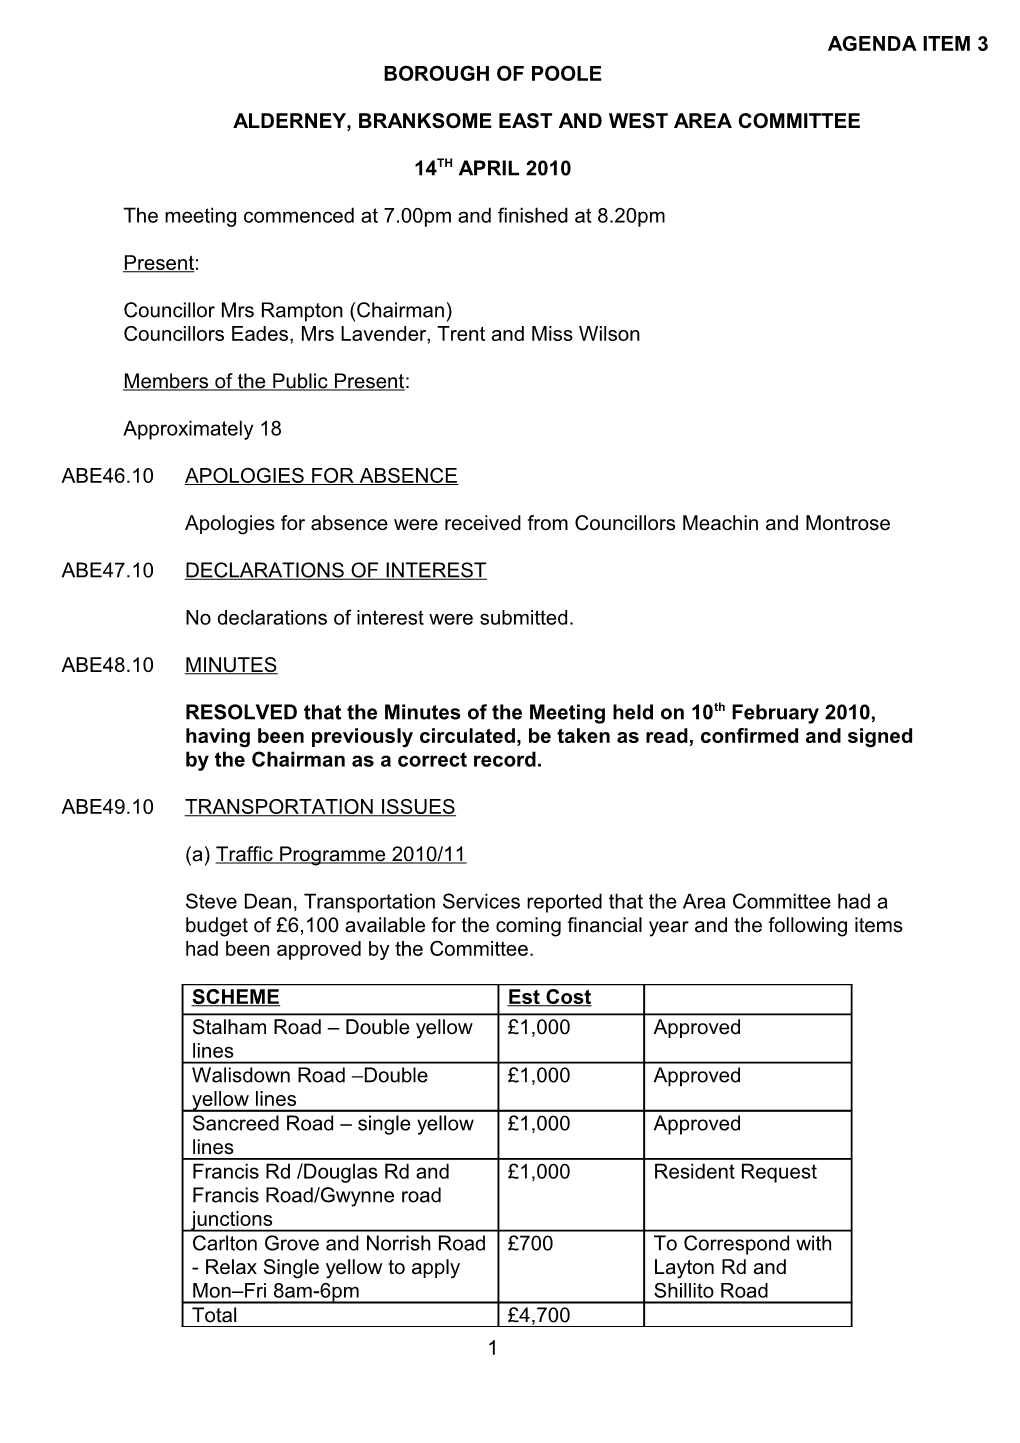 Minutes - Alderney, Branksome East and West Area Committee - 14 April 2010